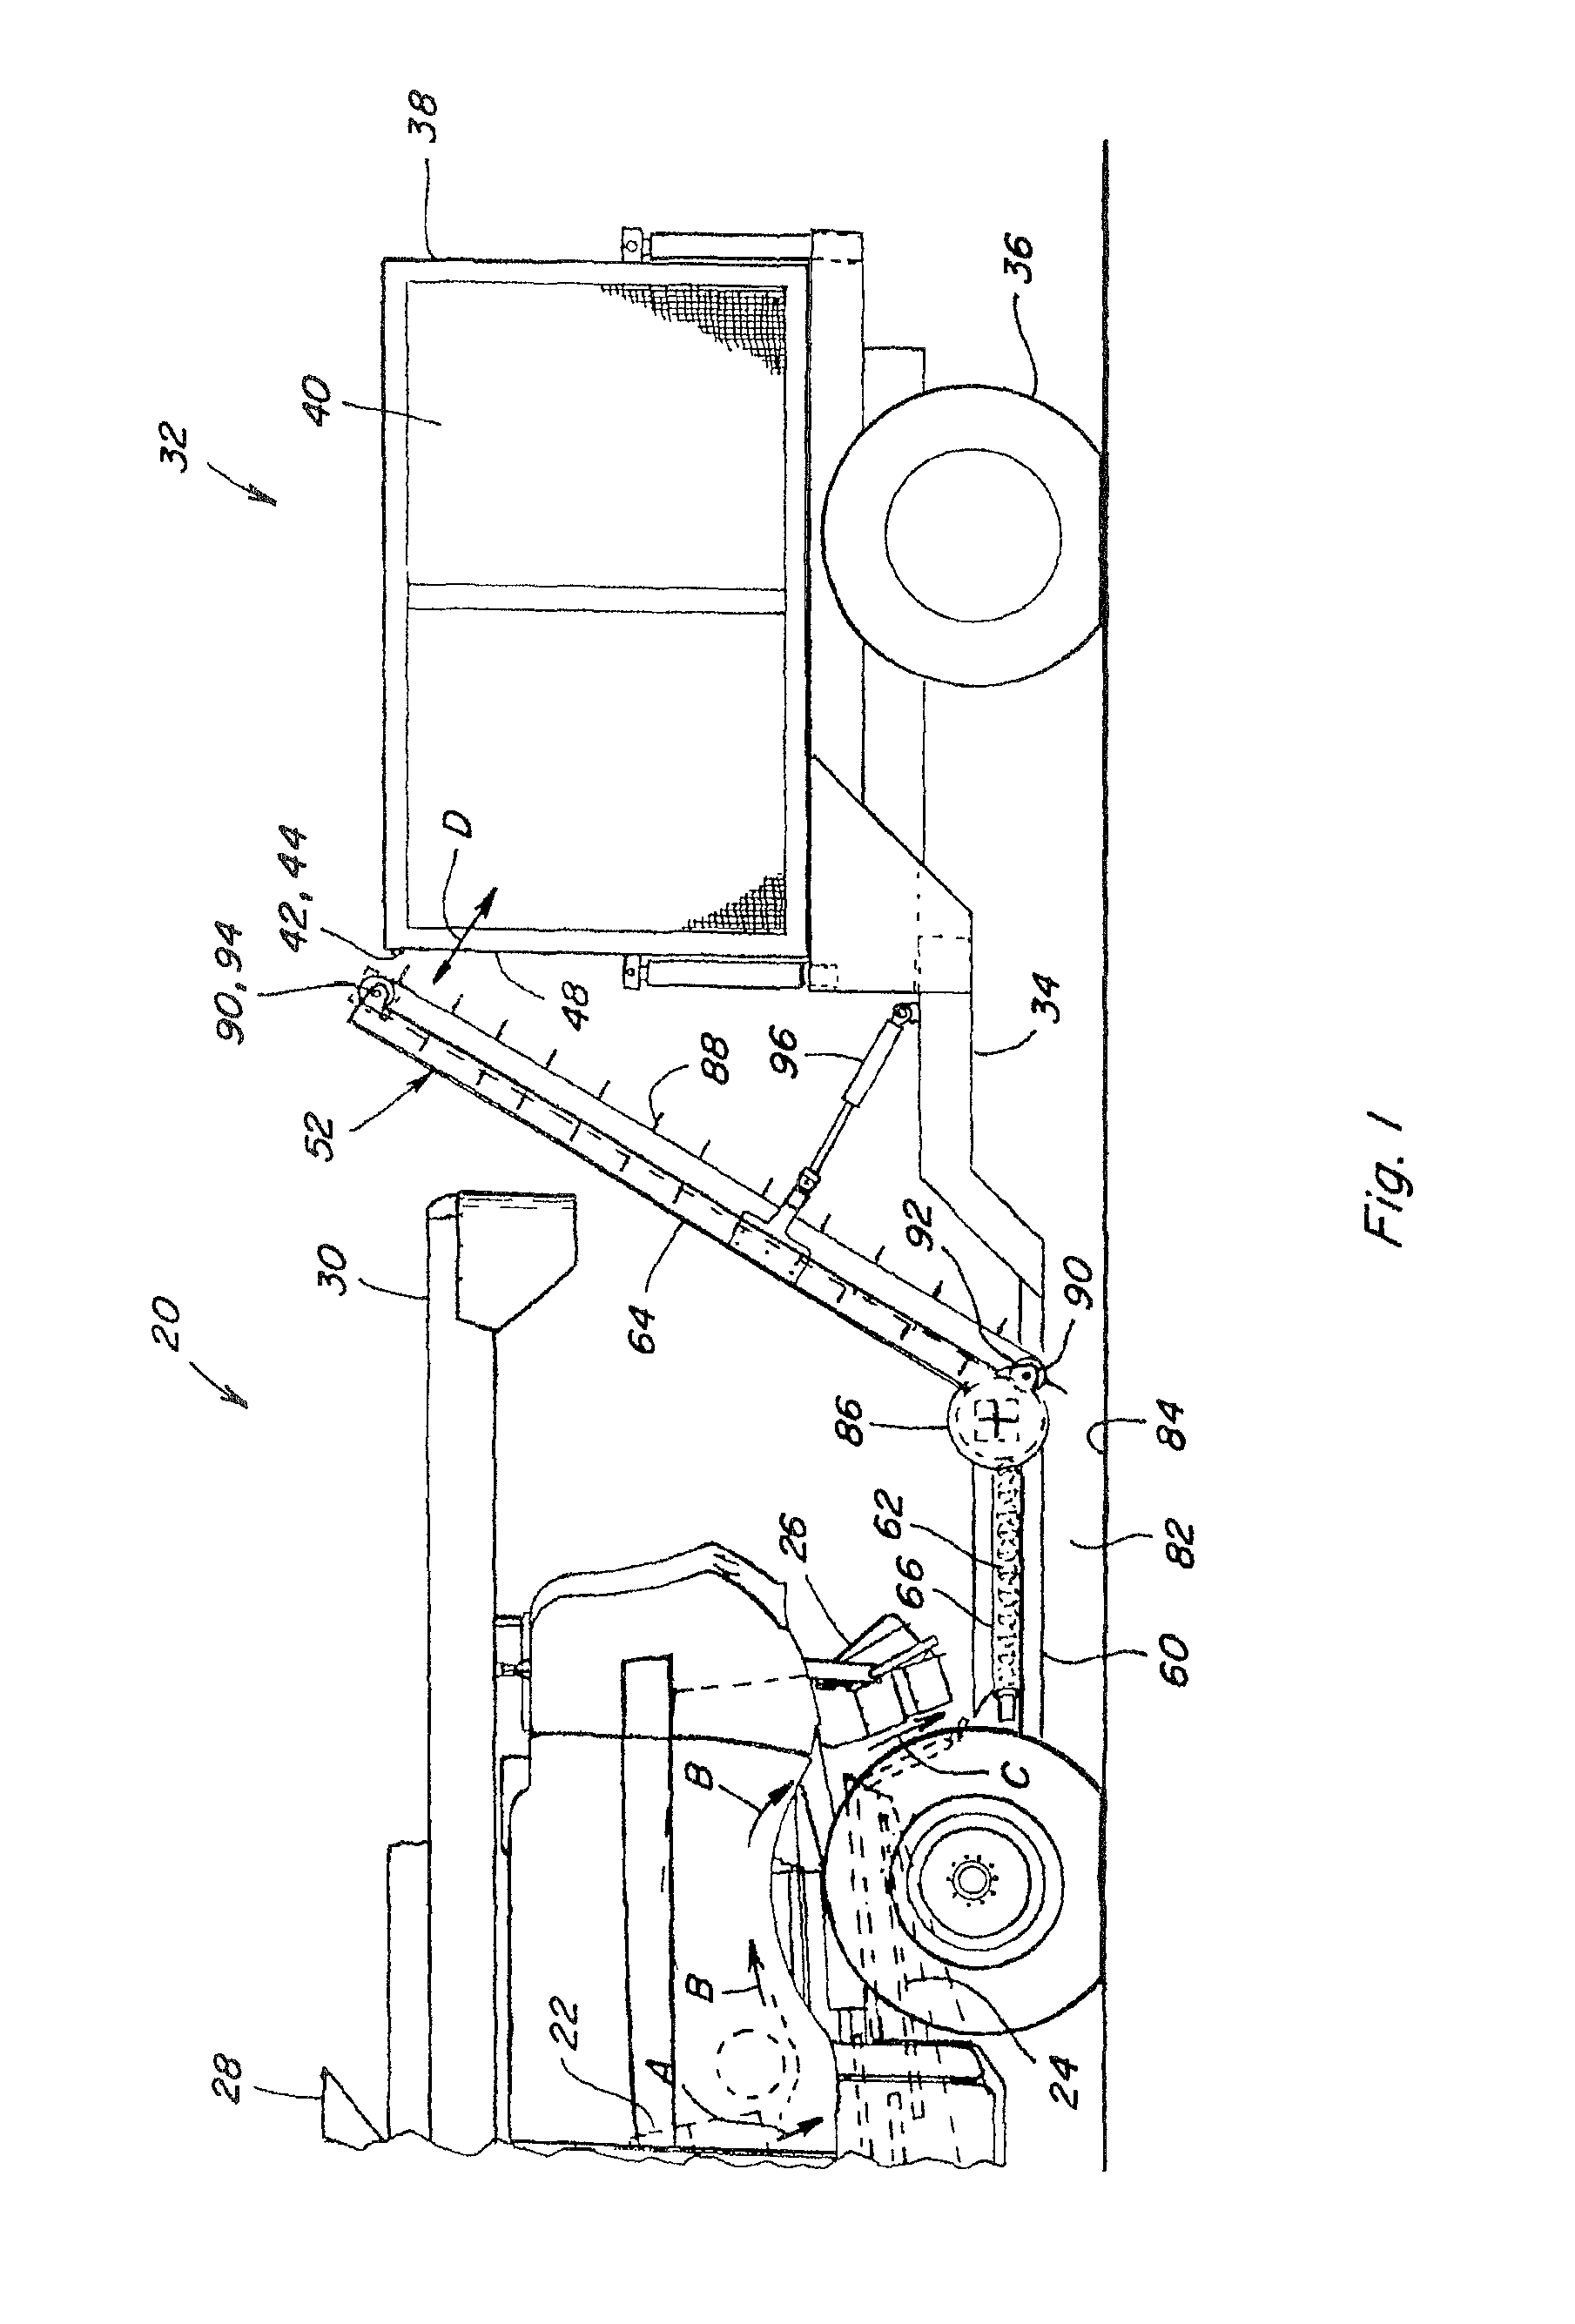 Corn cob collection device with stowable conveyor system having positive de-husking capability